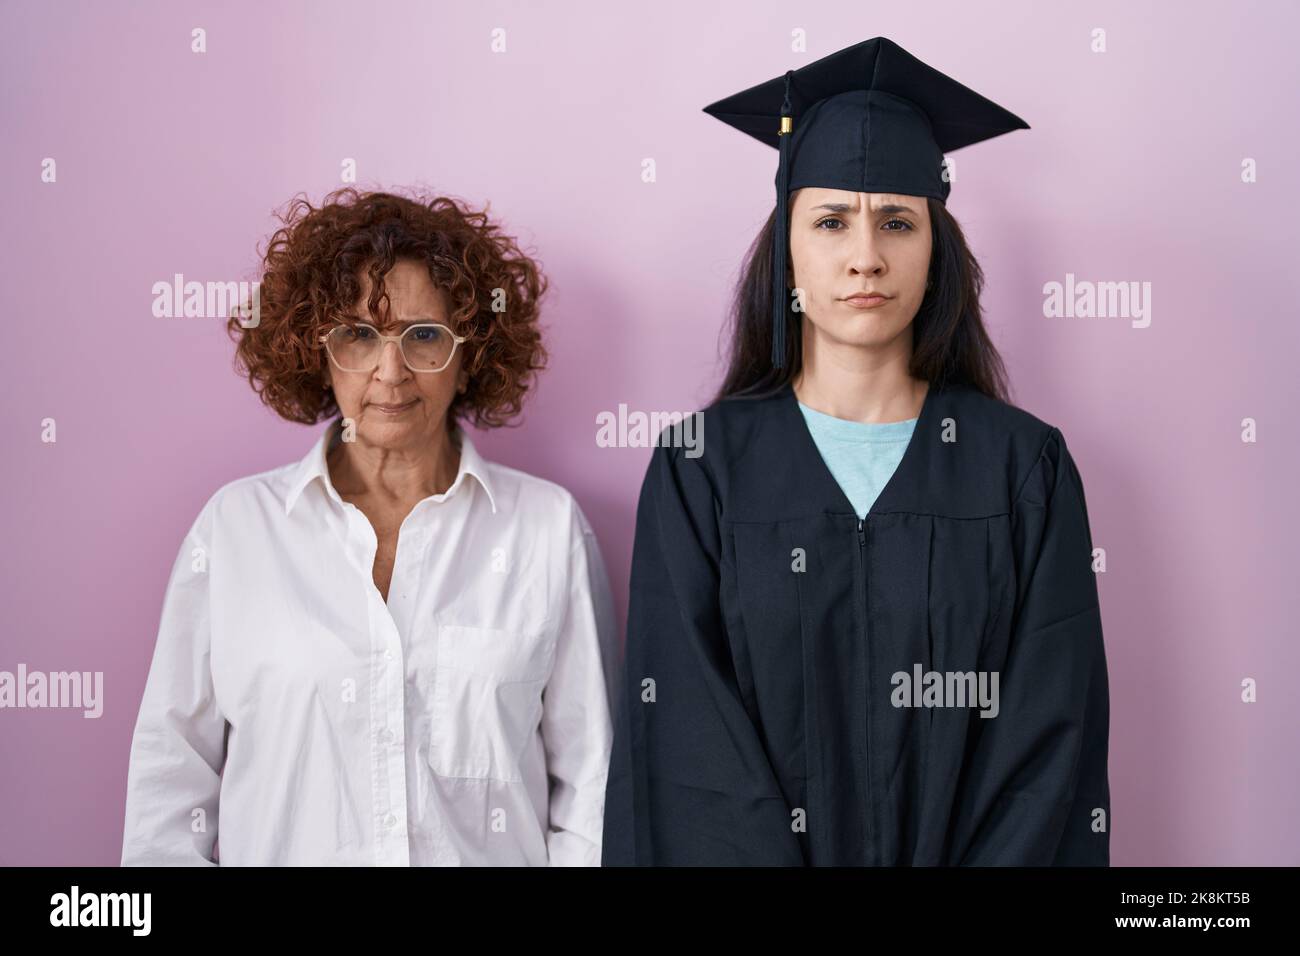 Hispanic mother and daughter wearing graduation cap and ceremony robe skeptic and nervous, frowning upset because of problem. negative person. Stock Photo